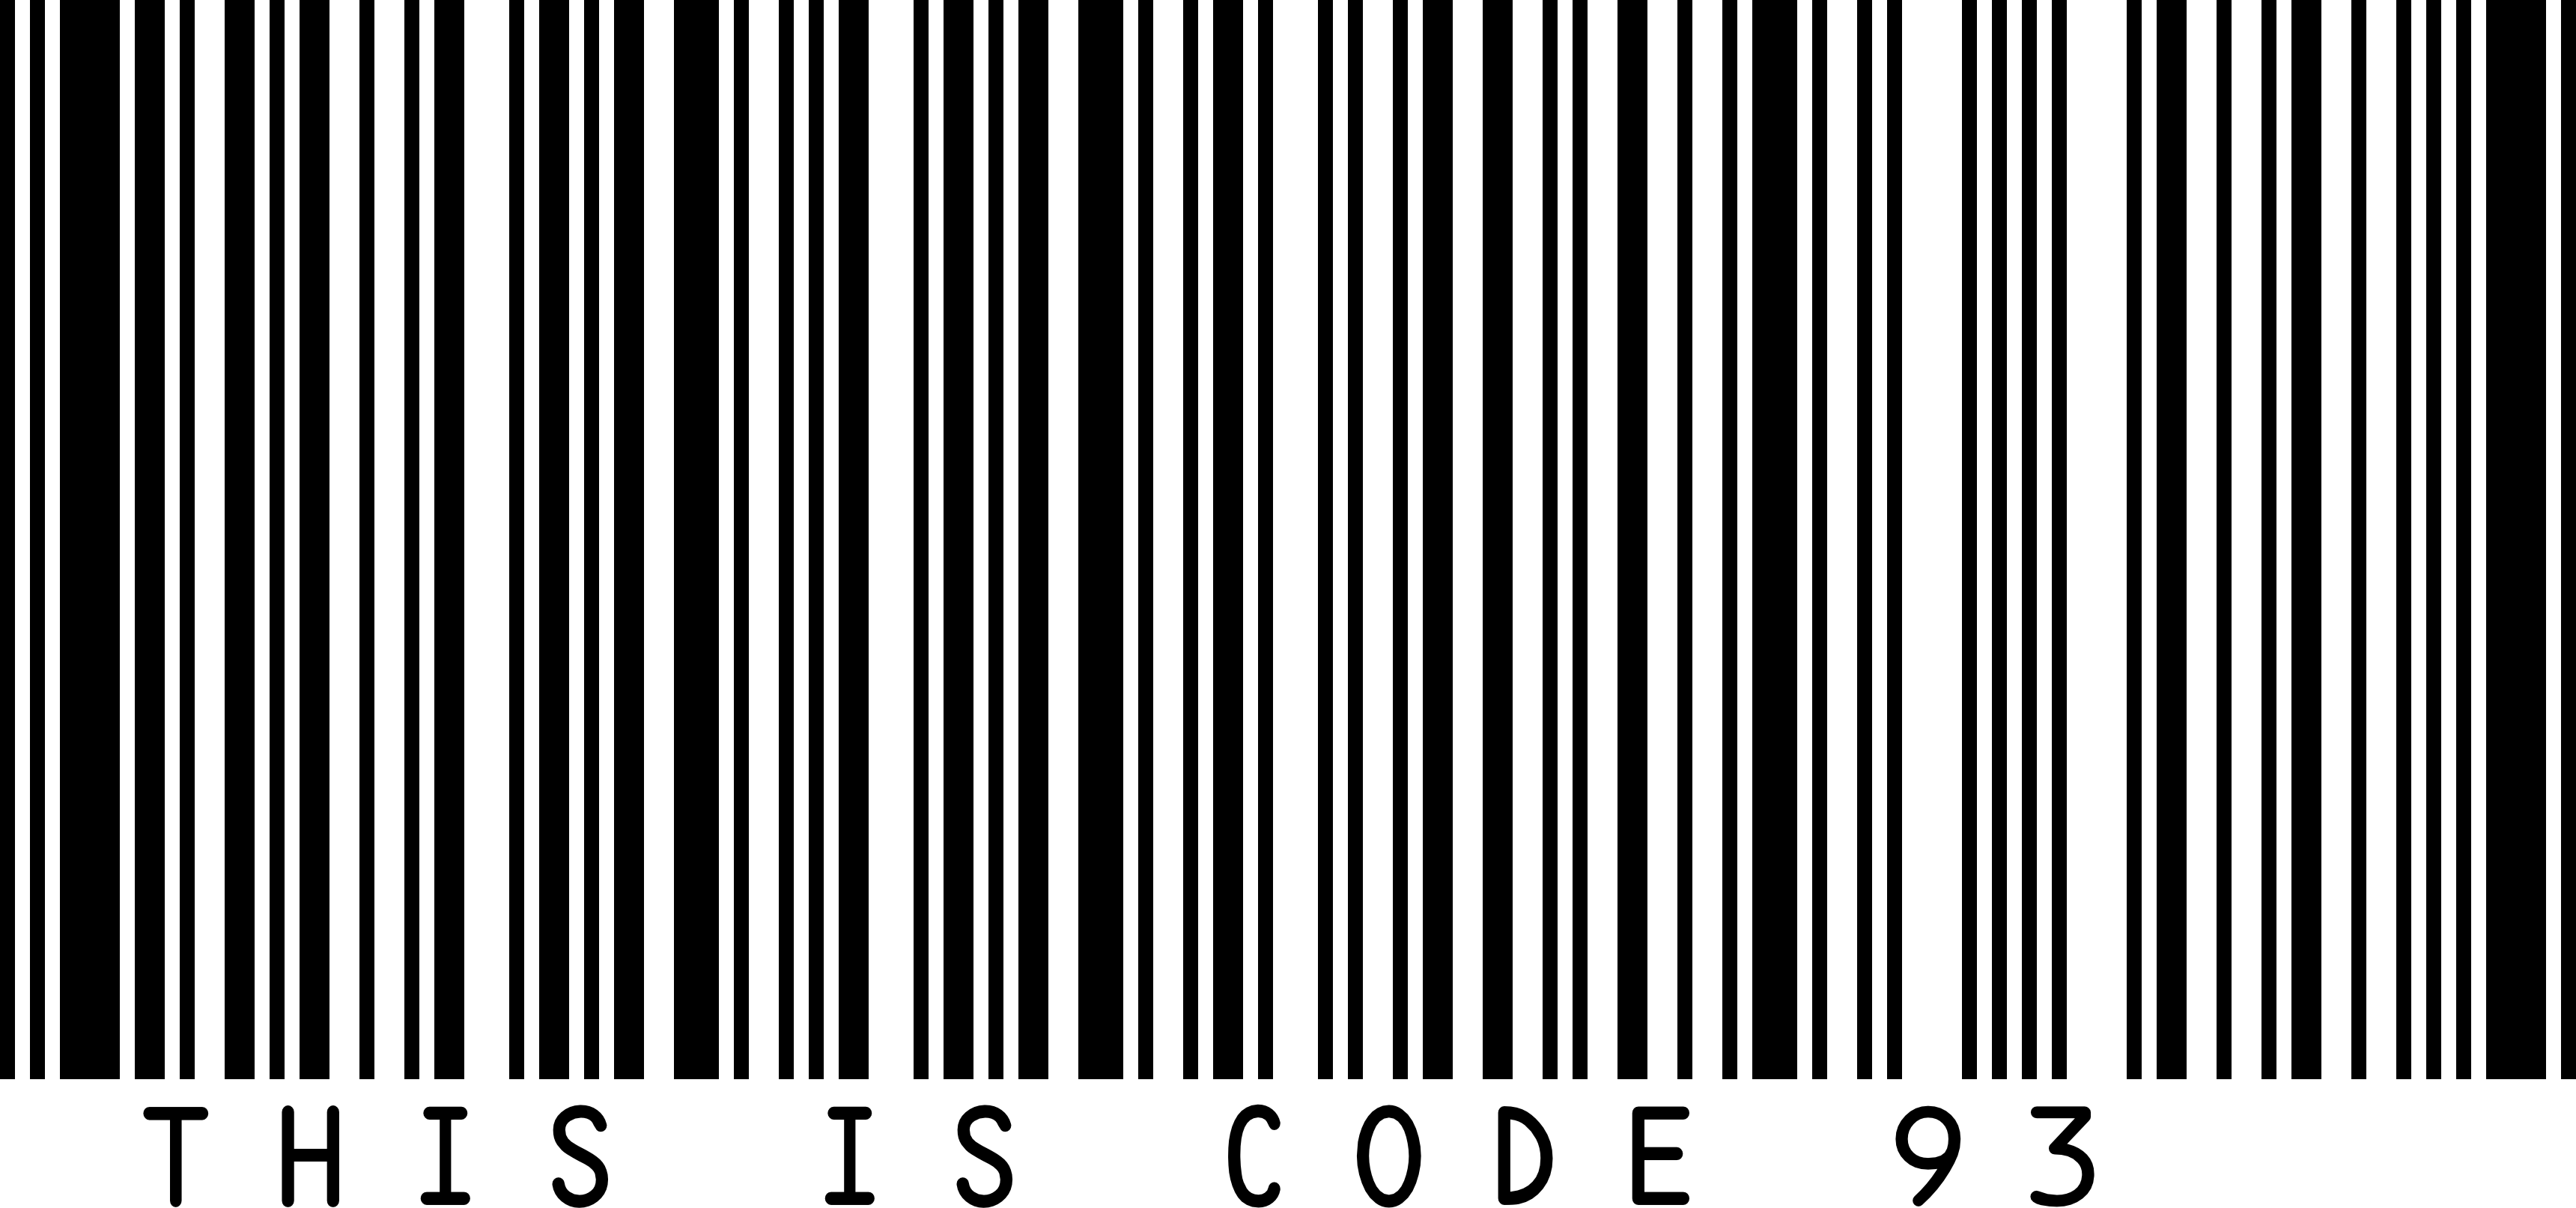 Example Code93 Barcode